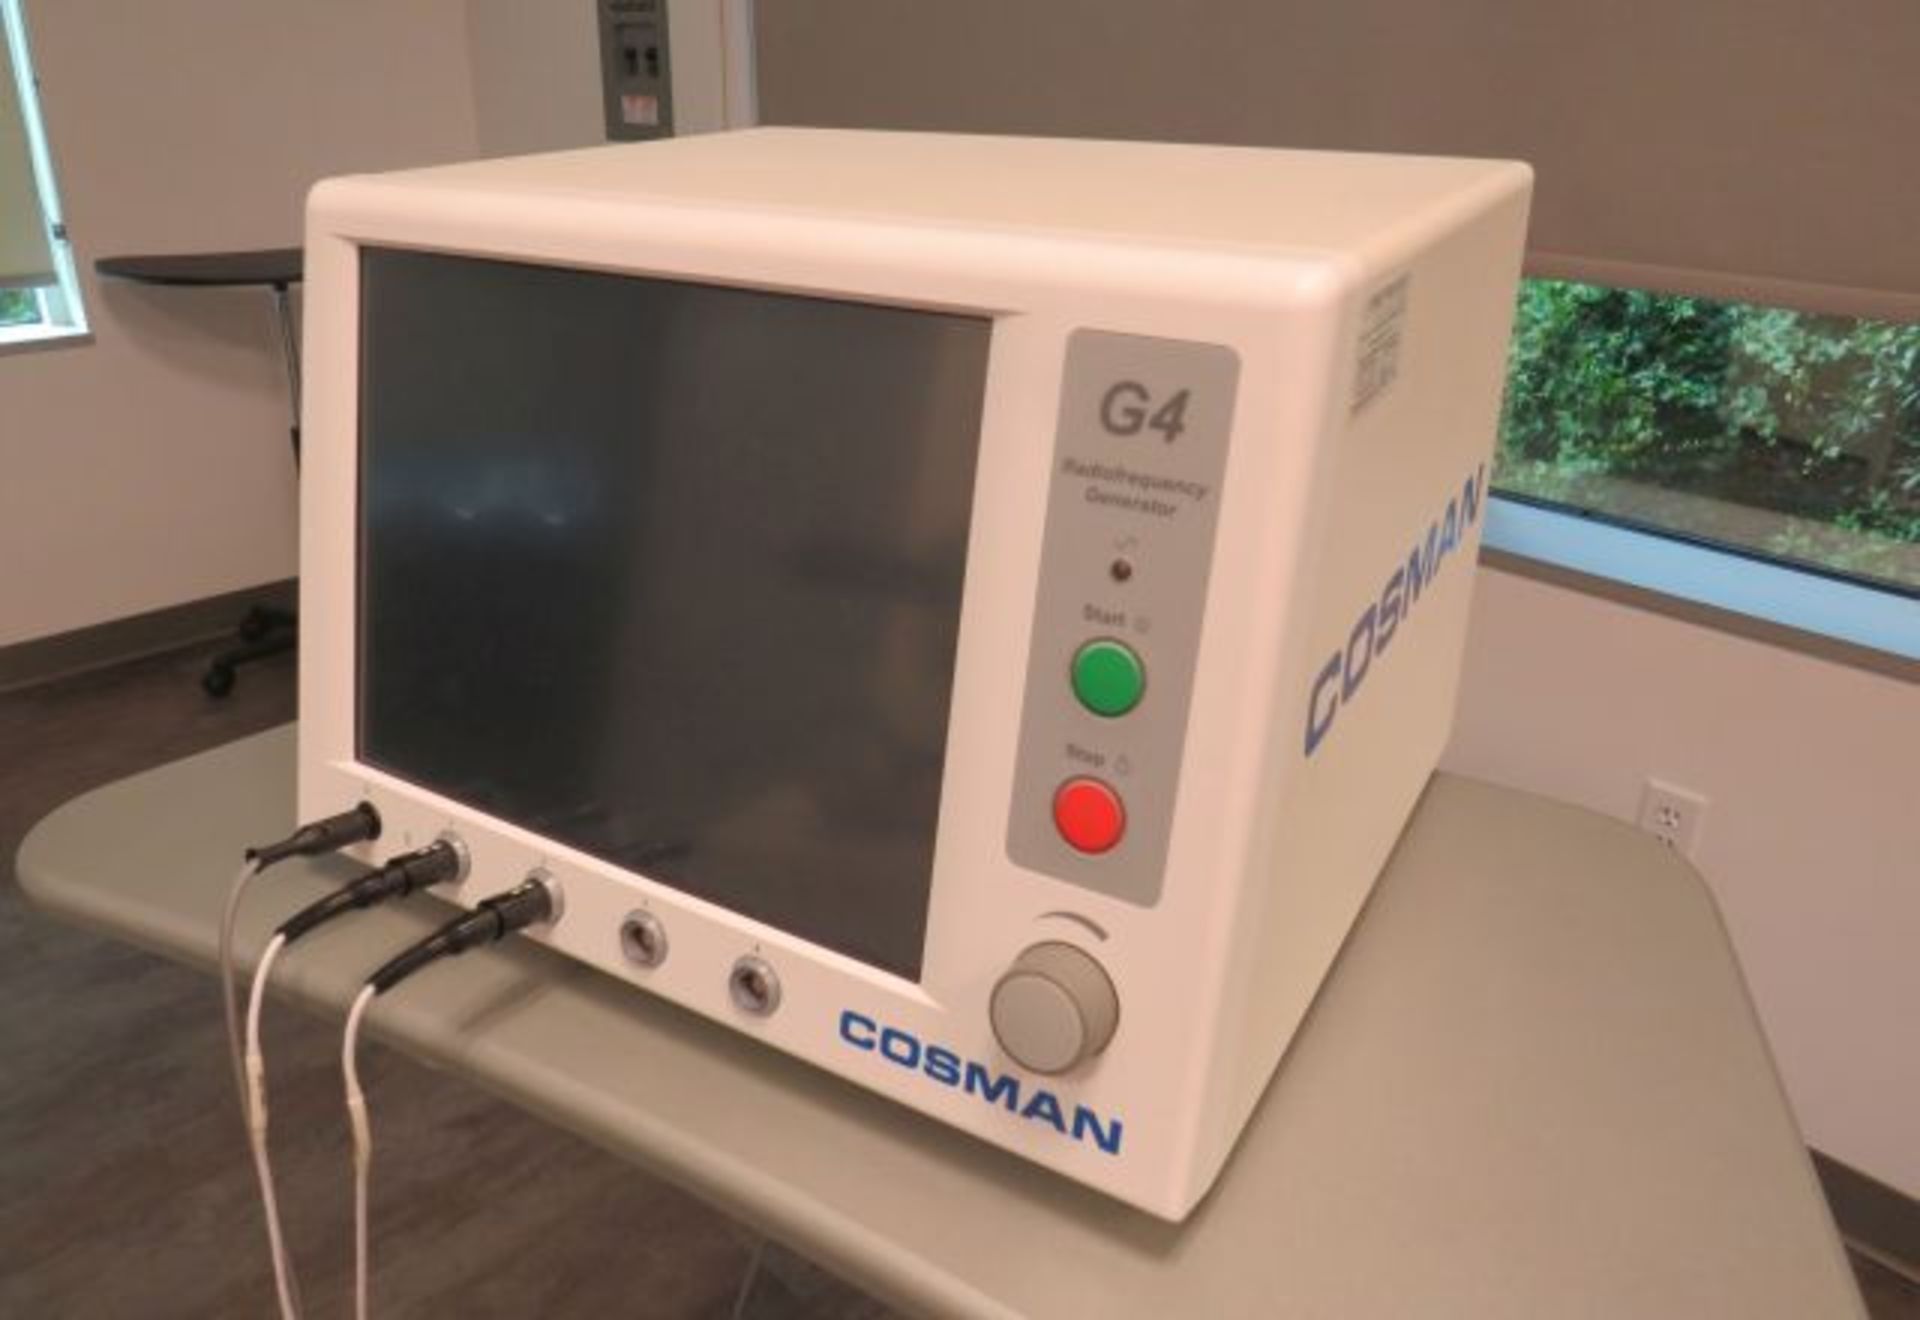 Cosman G4, RFG-4, Radio frequency Generator Shock Therapy, comes with Adjustable height stand on... - Image 2 of 3